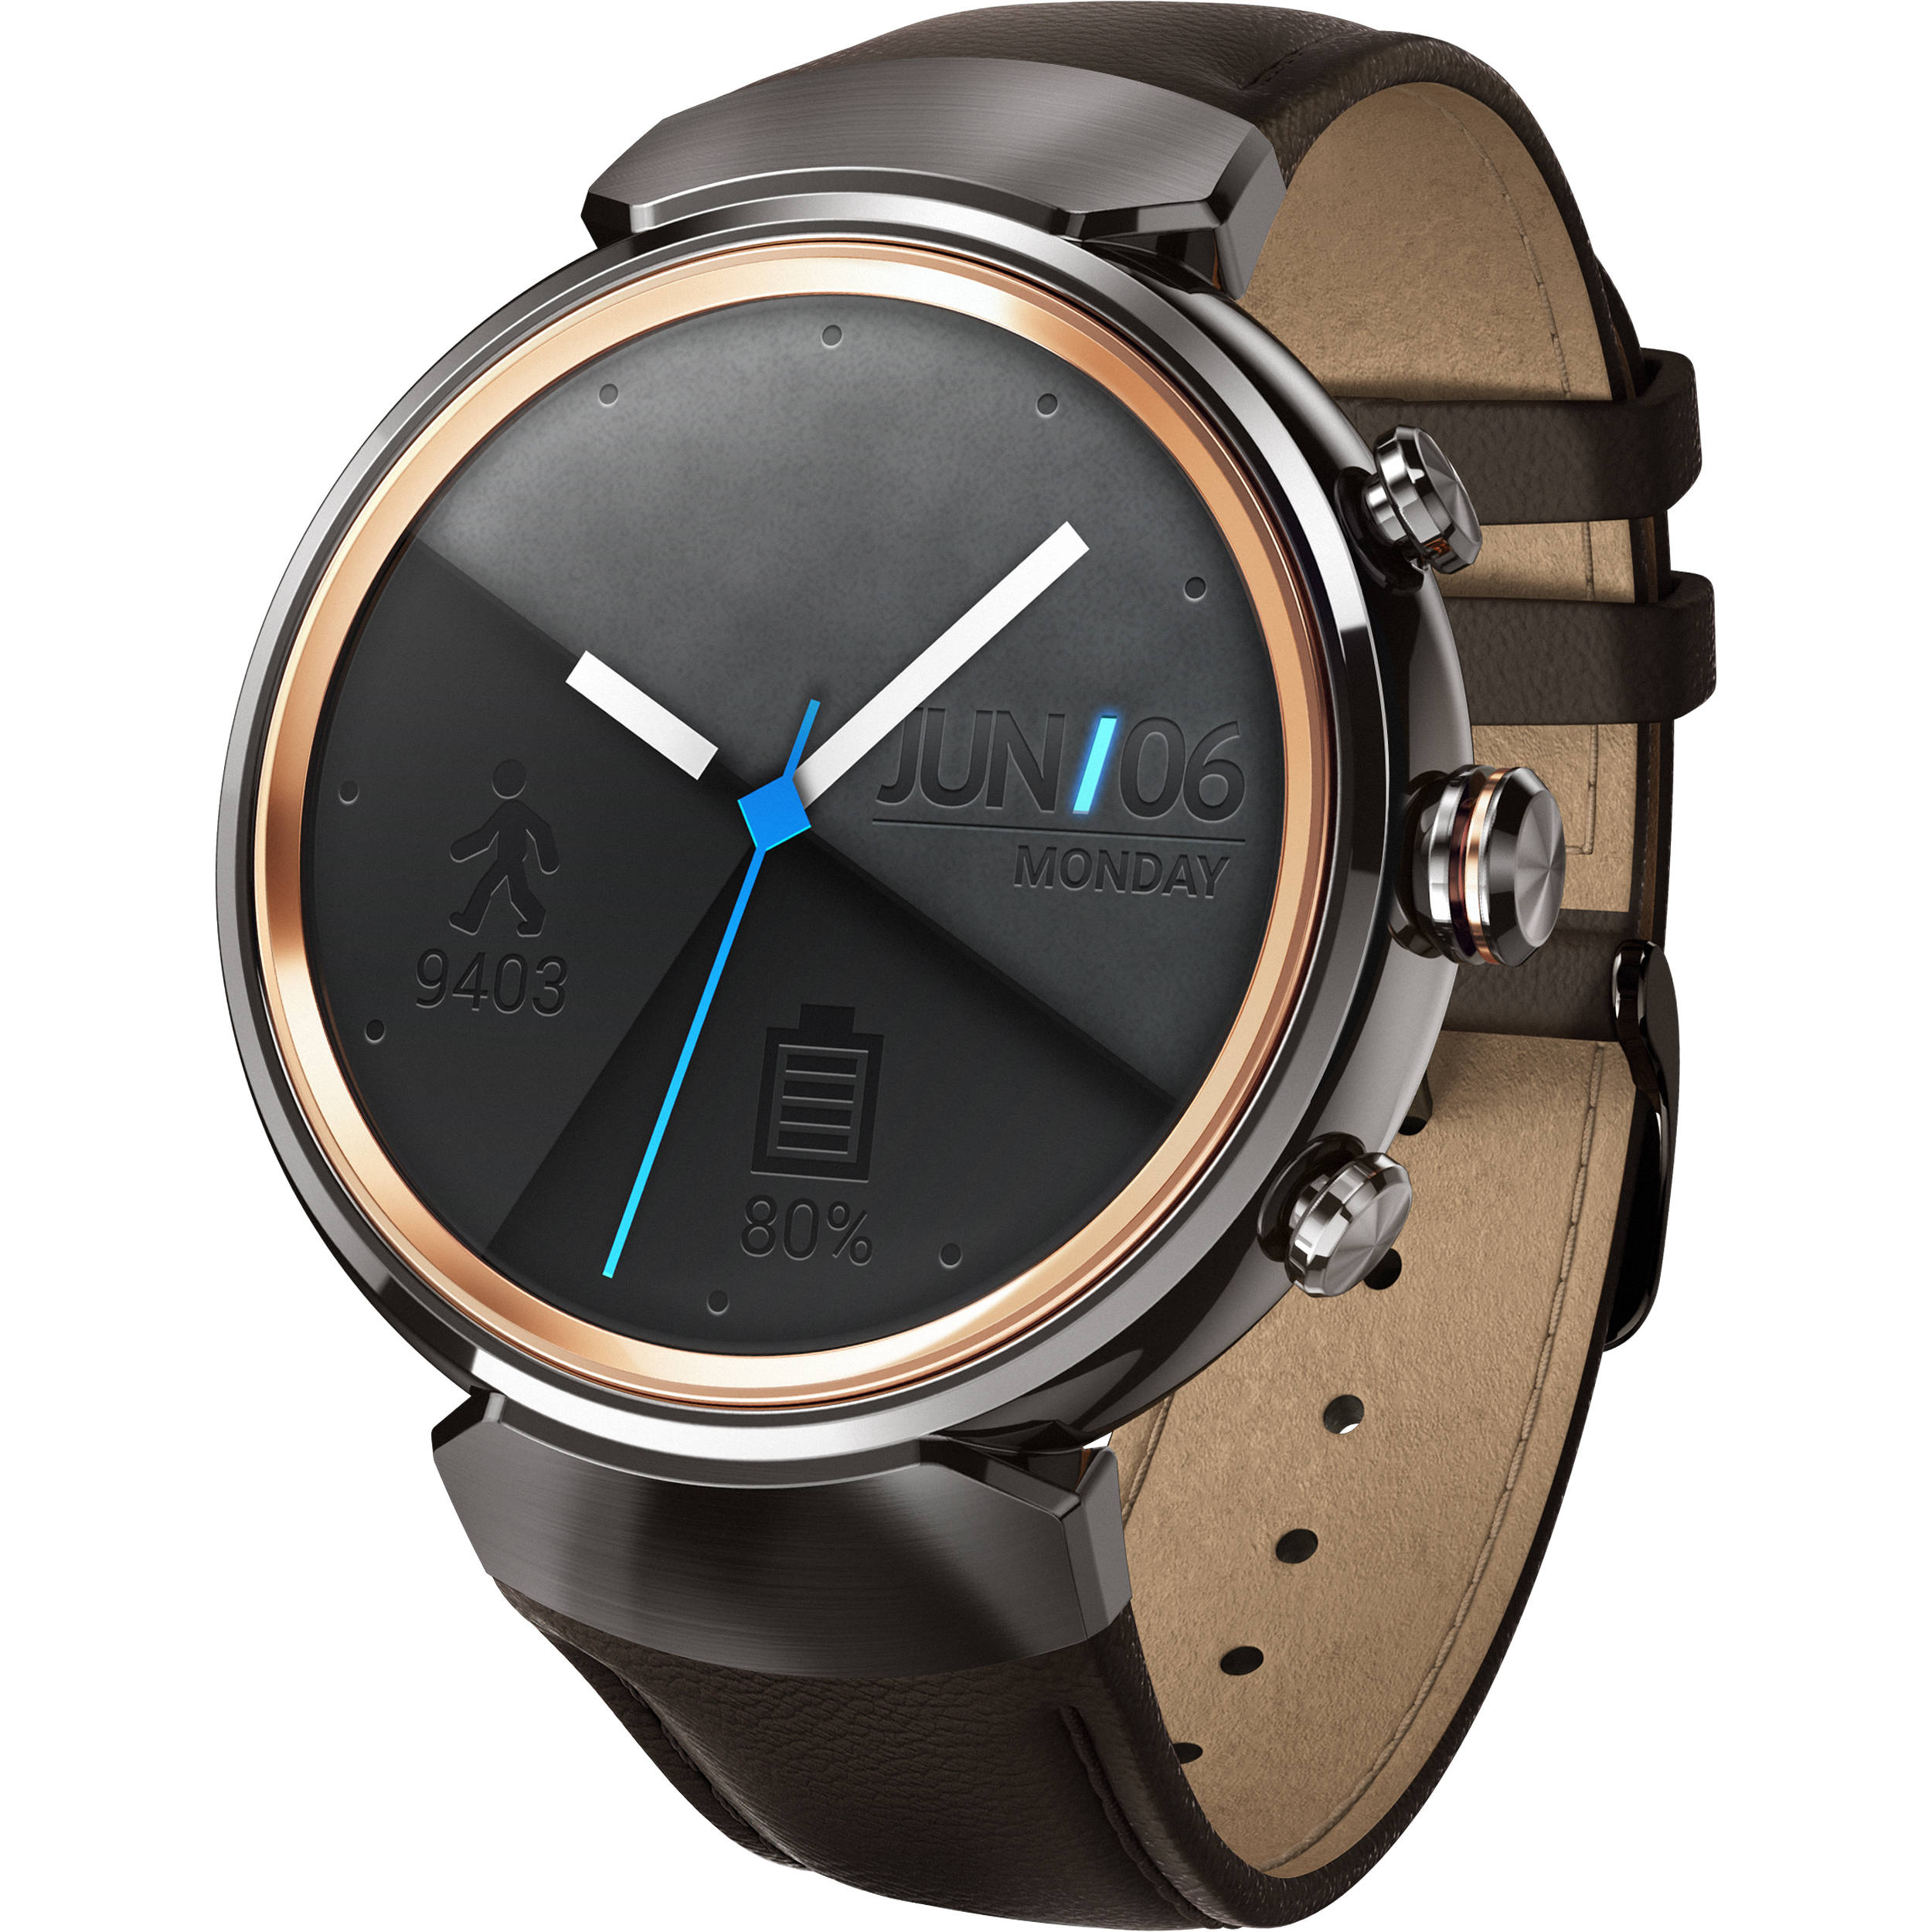 Asus Zenwatch 3 Dimensions on Sale, UP TO 60% OFF | www.loop-cn.com